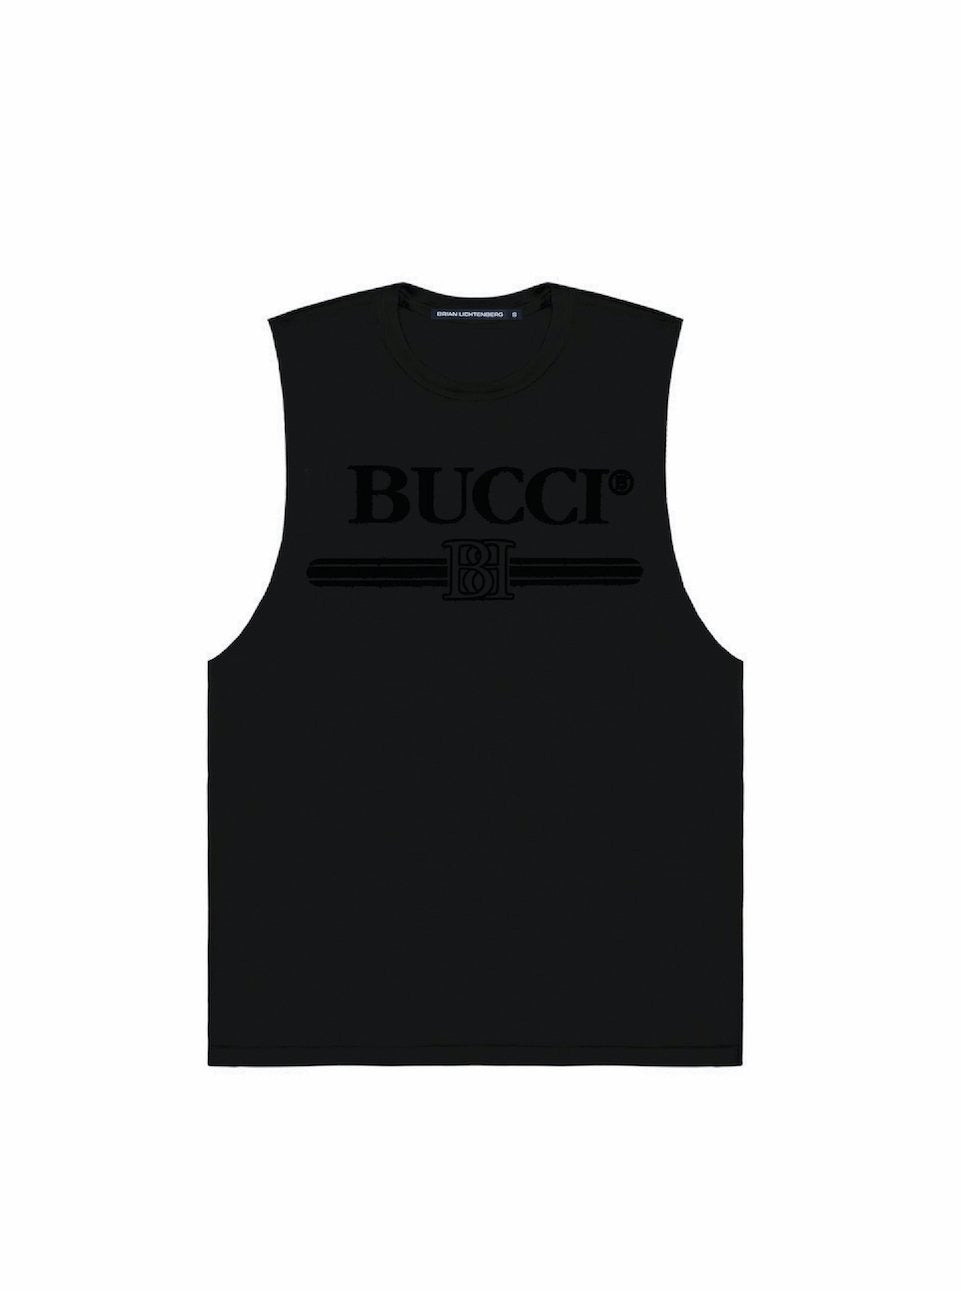 BUCCI FUZZY TOUCH MUSCLE TEE